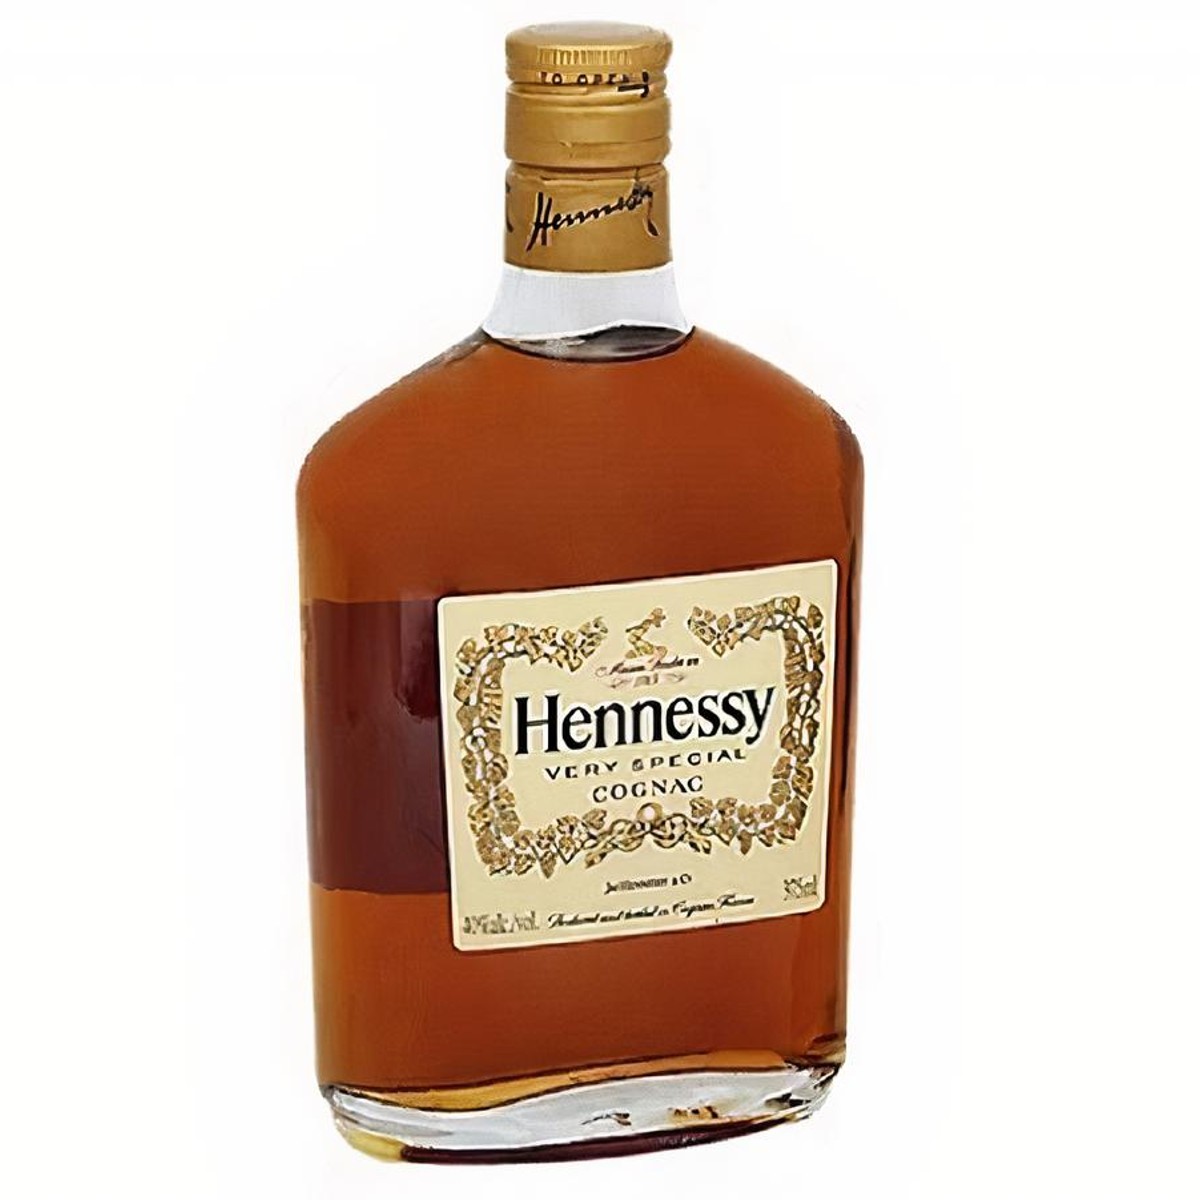 HENNESSY COGNAC (750 ML) - $46.99 - $125 Free Shipping 